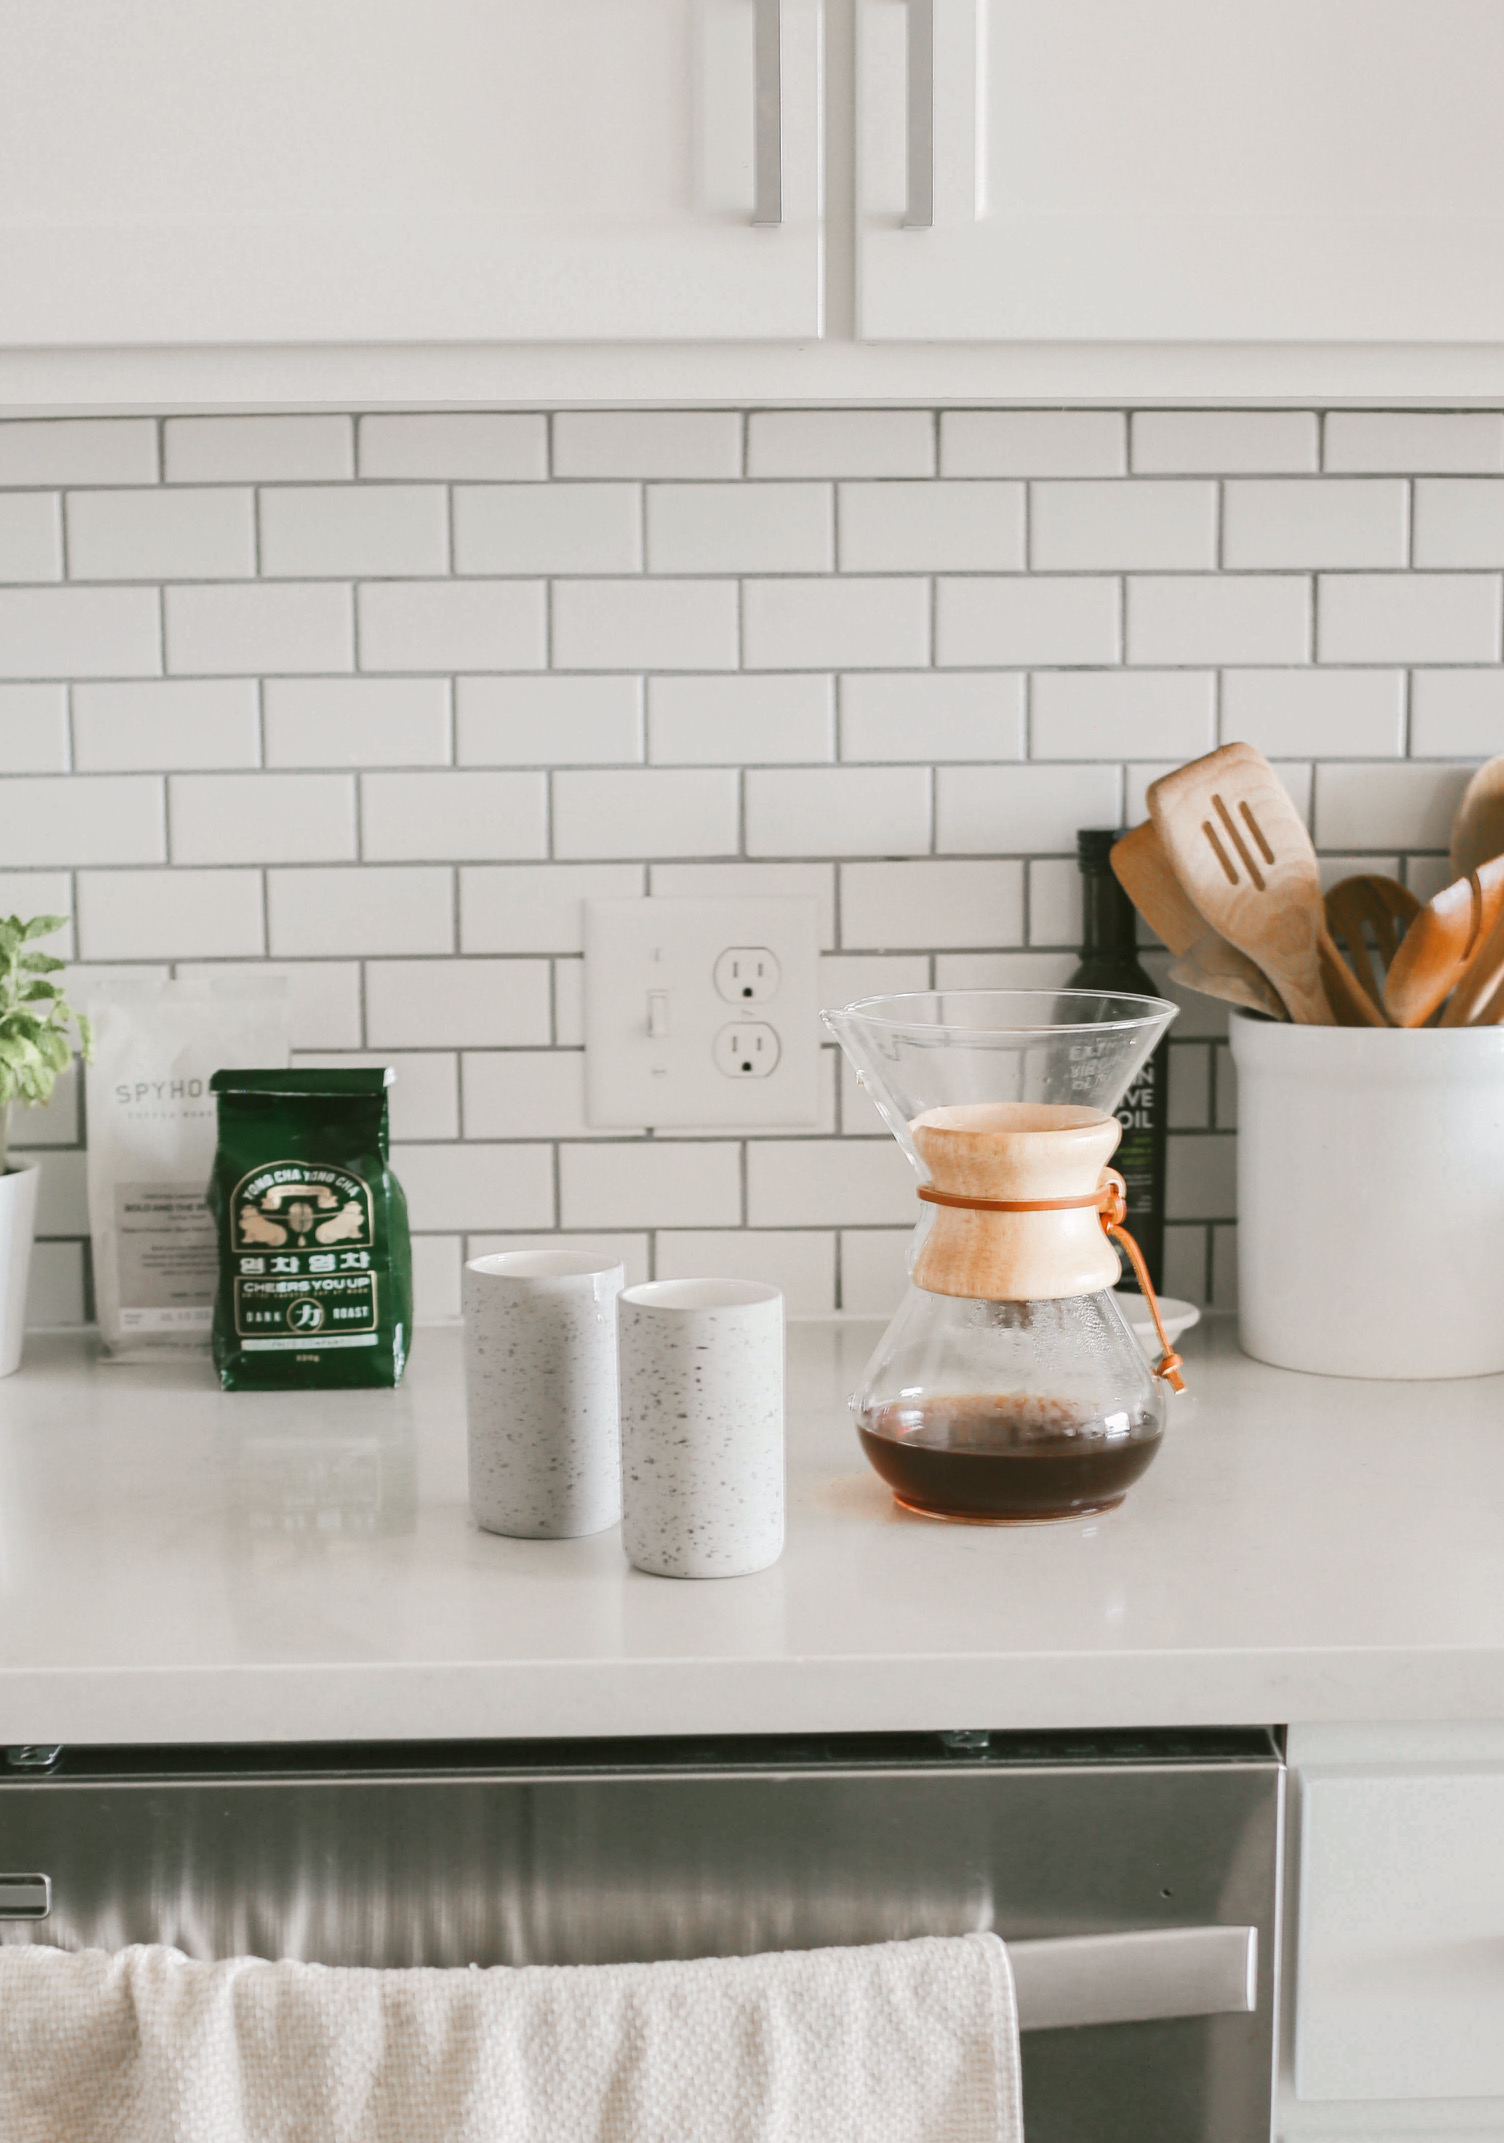 Tips and tricks for brewing better pour over coffee at home